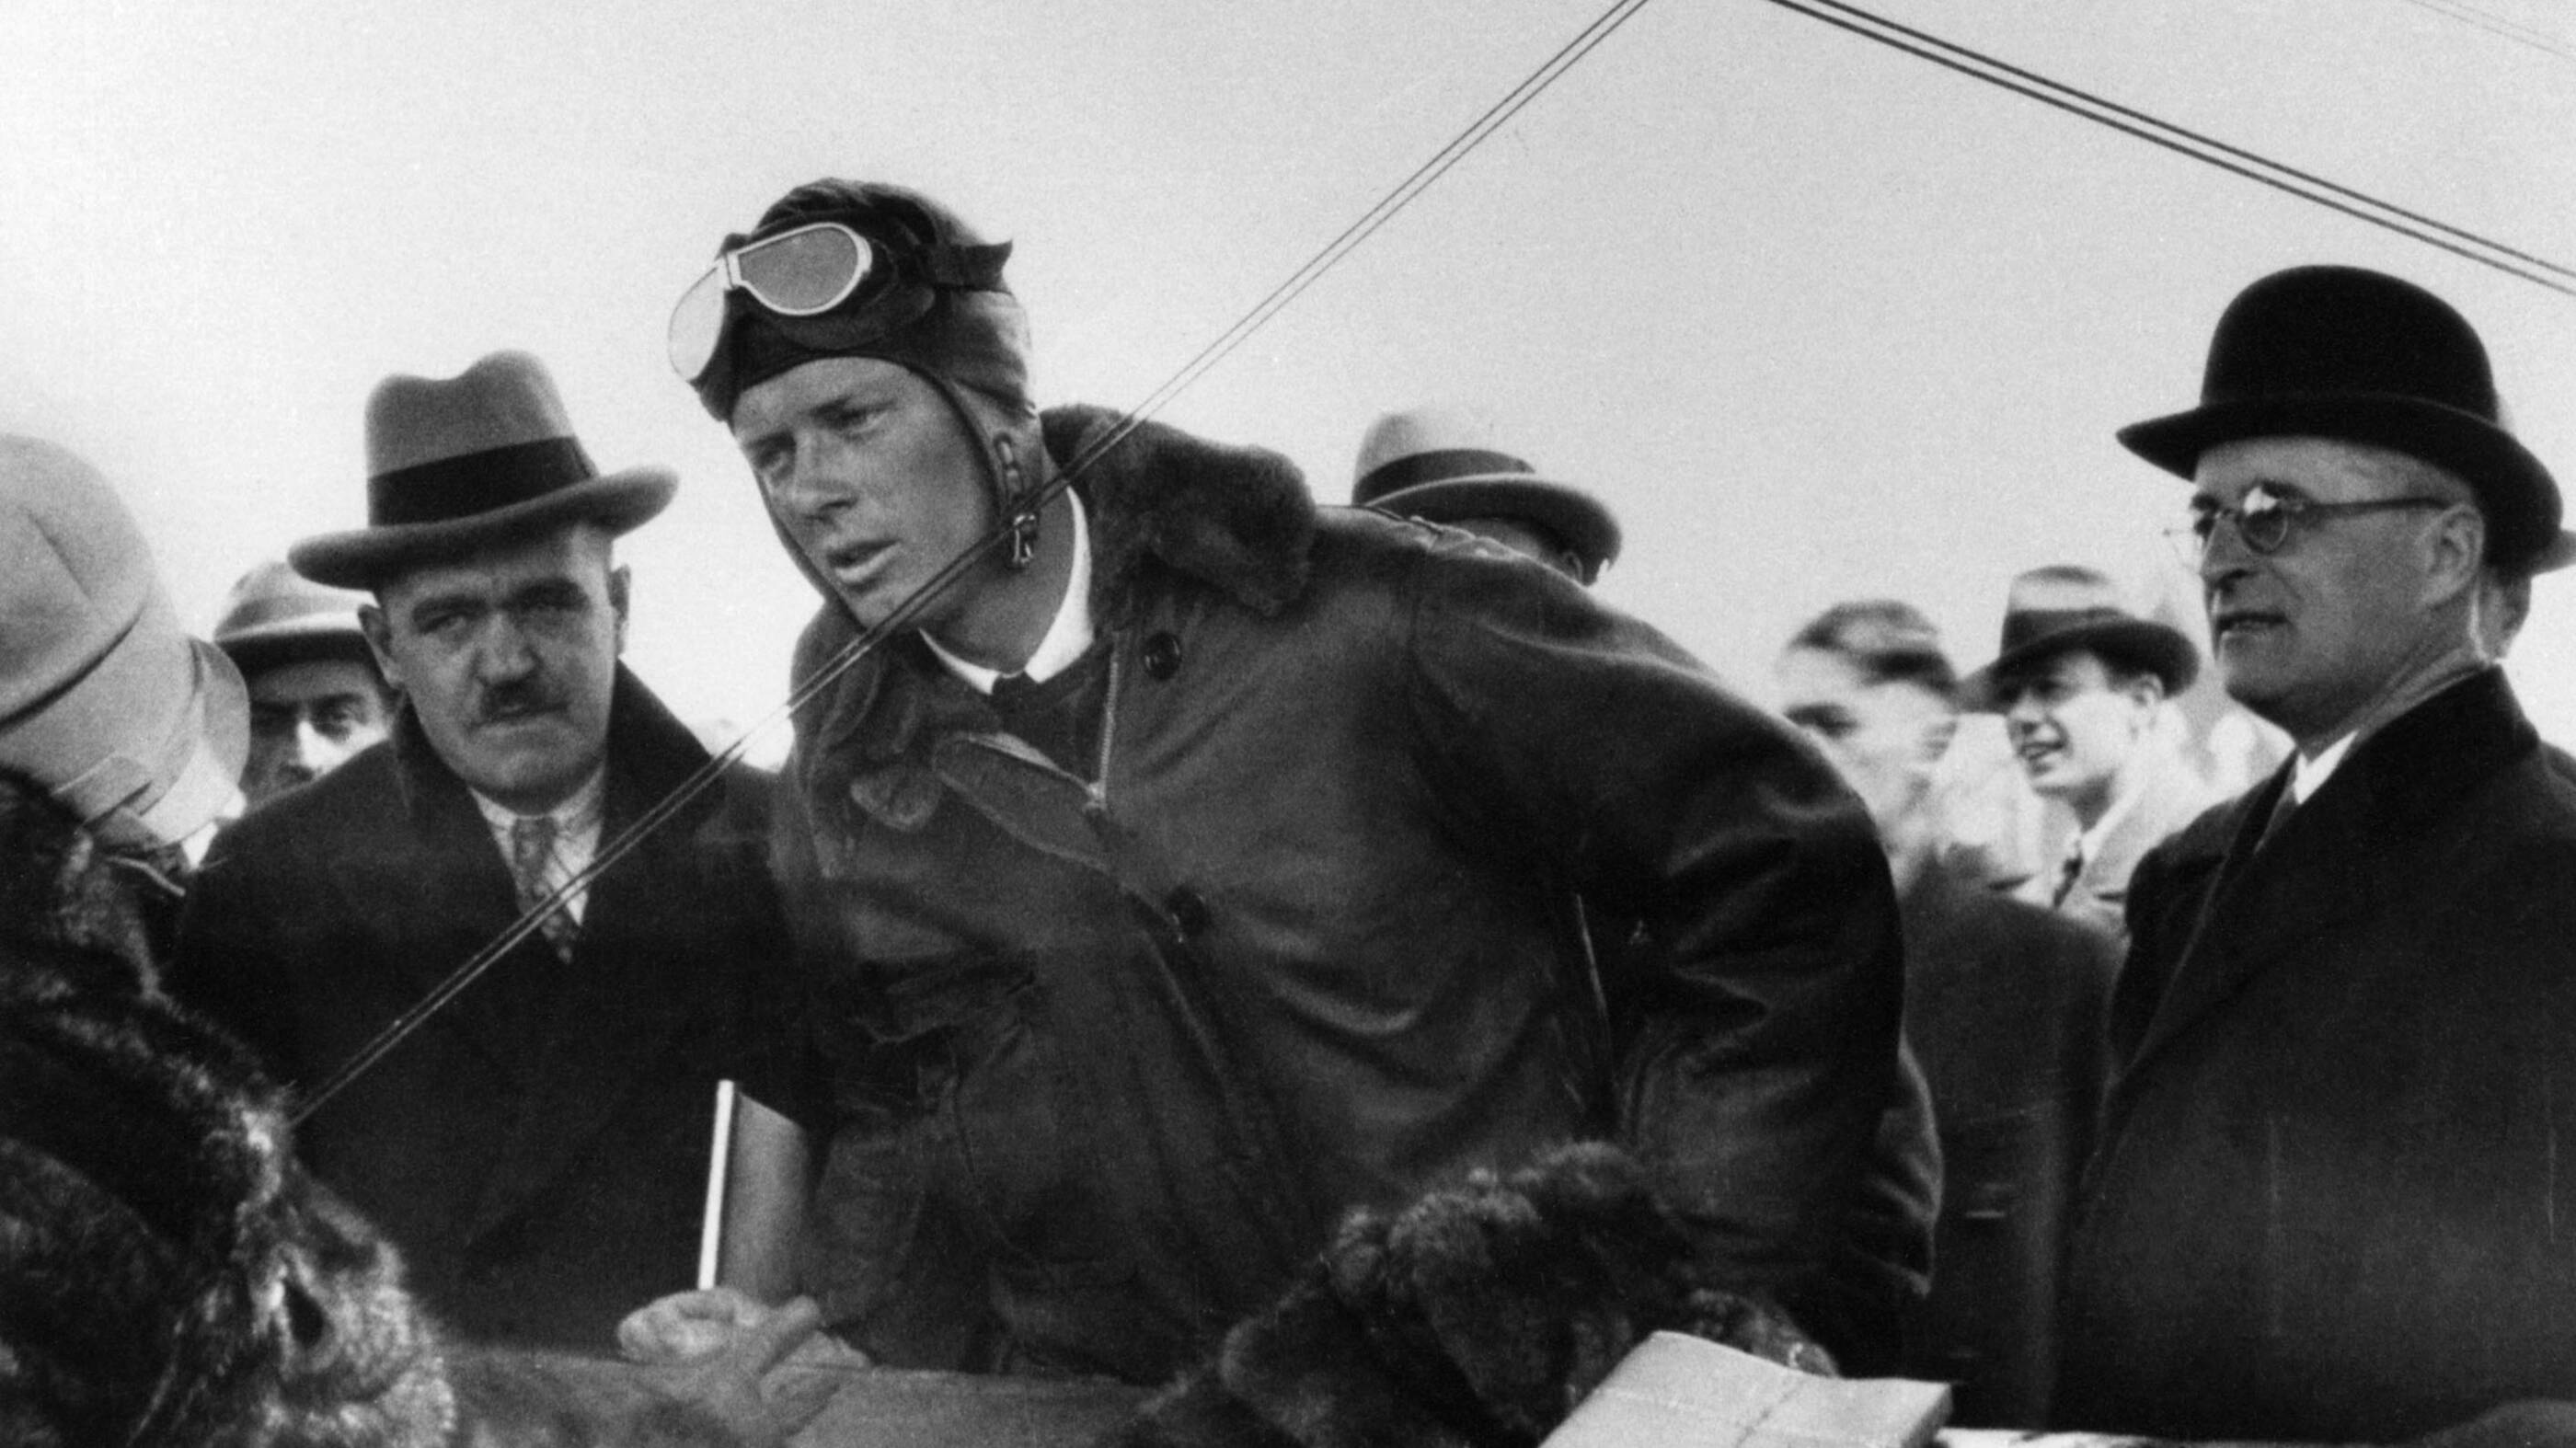 Charles Lindbergh buying Imperial Oil gasoline for his plane in Quebec City, Quebec.